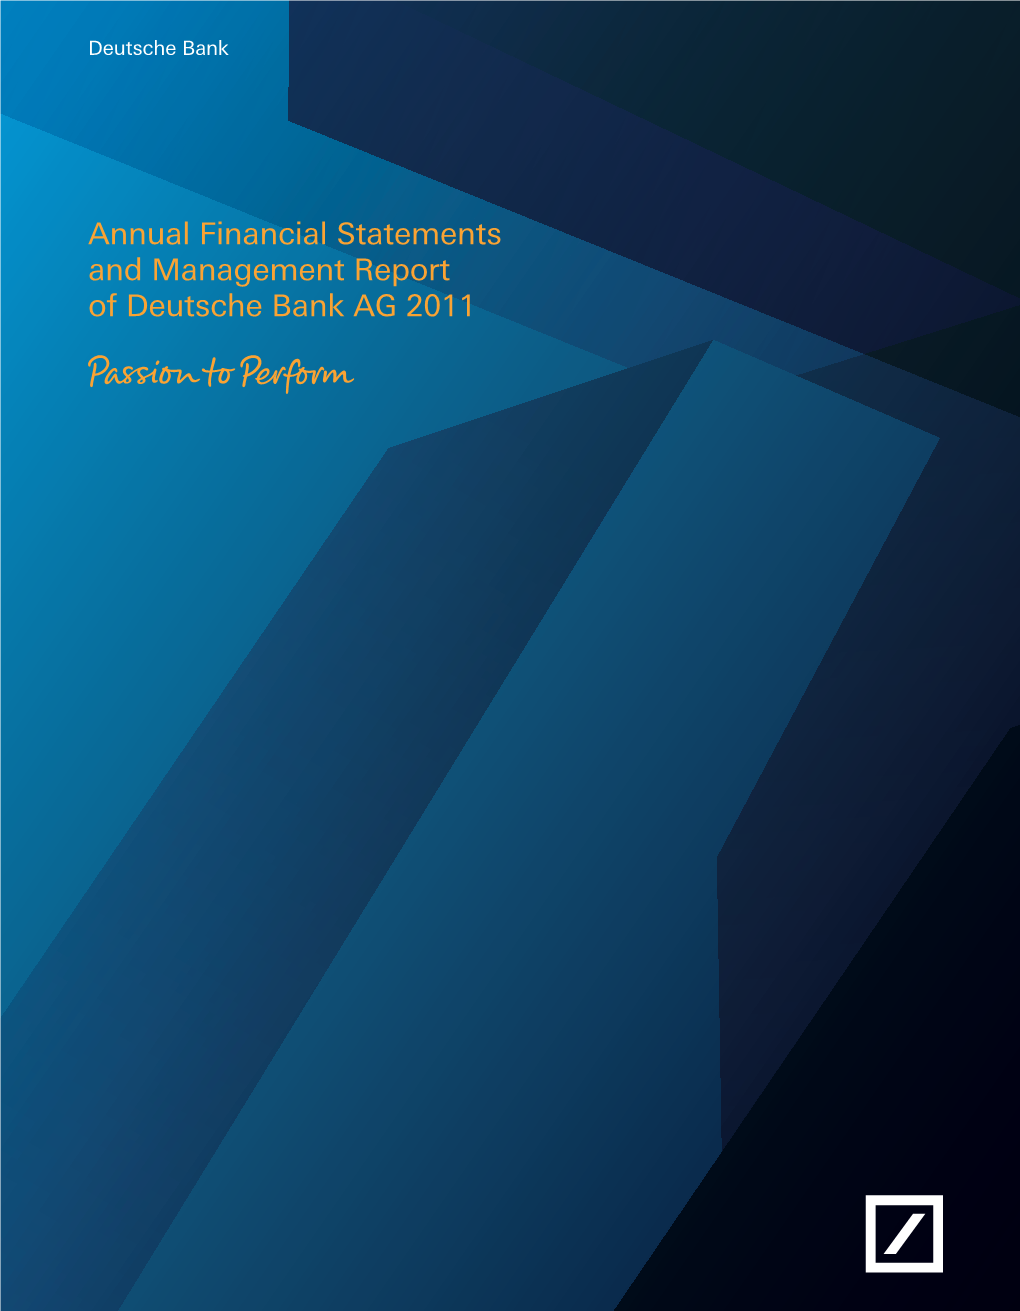 Annual Financial Statements and Management